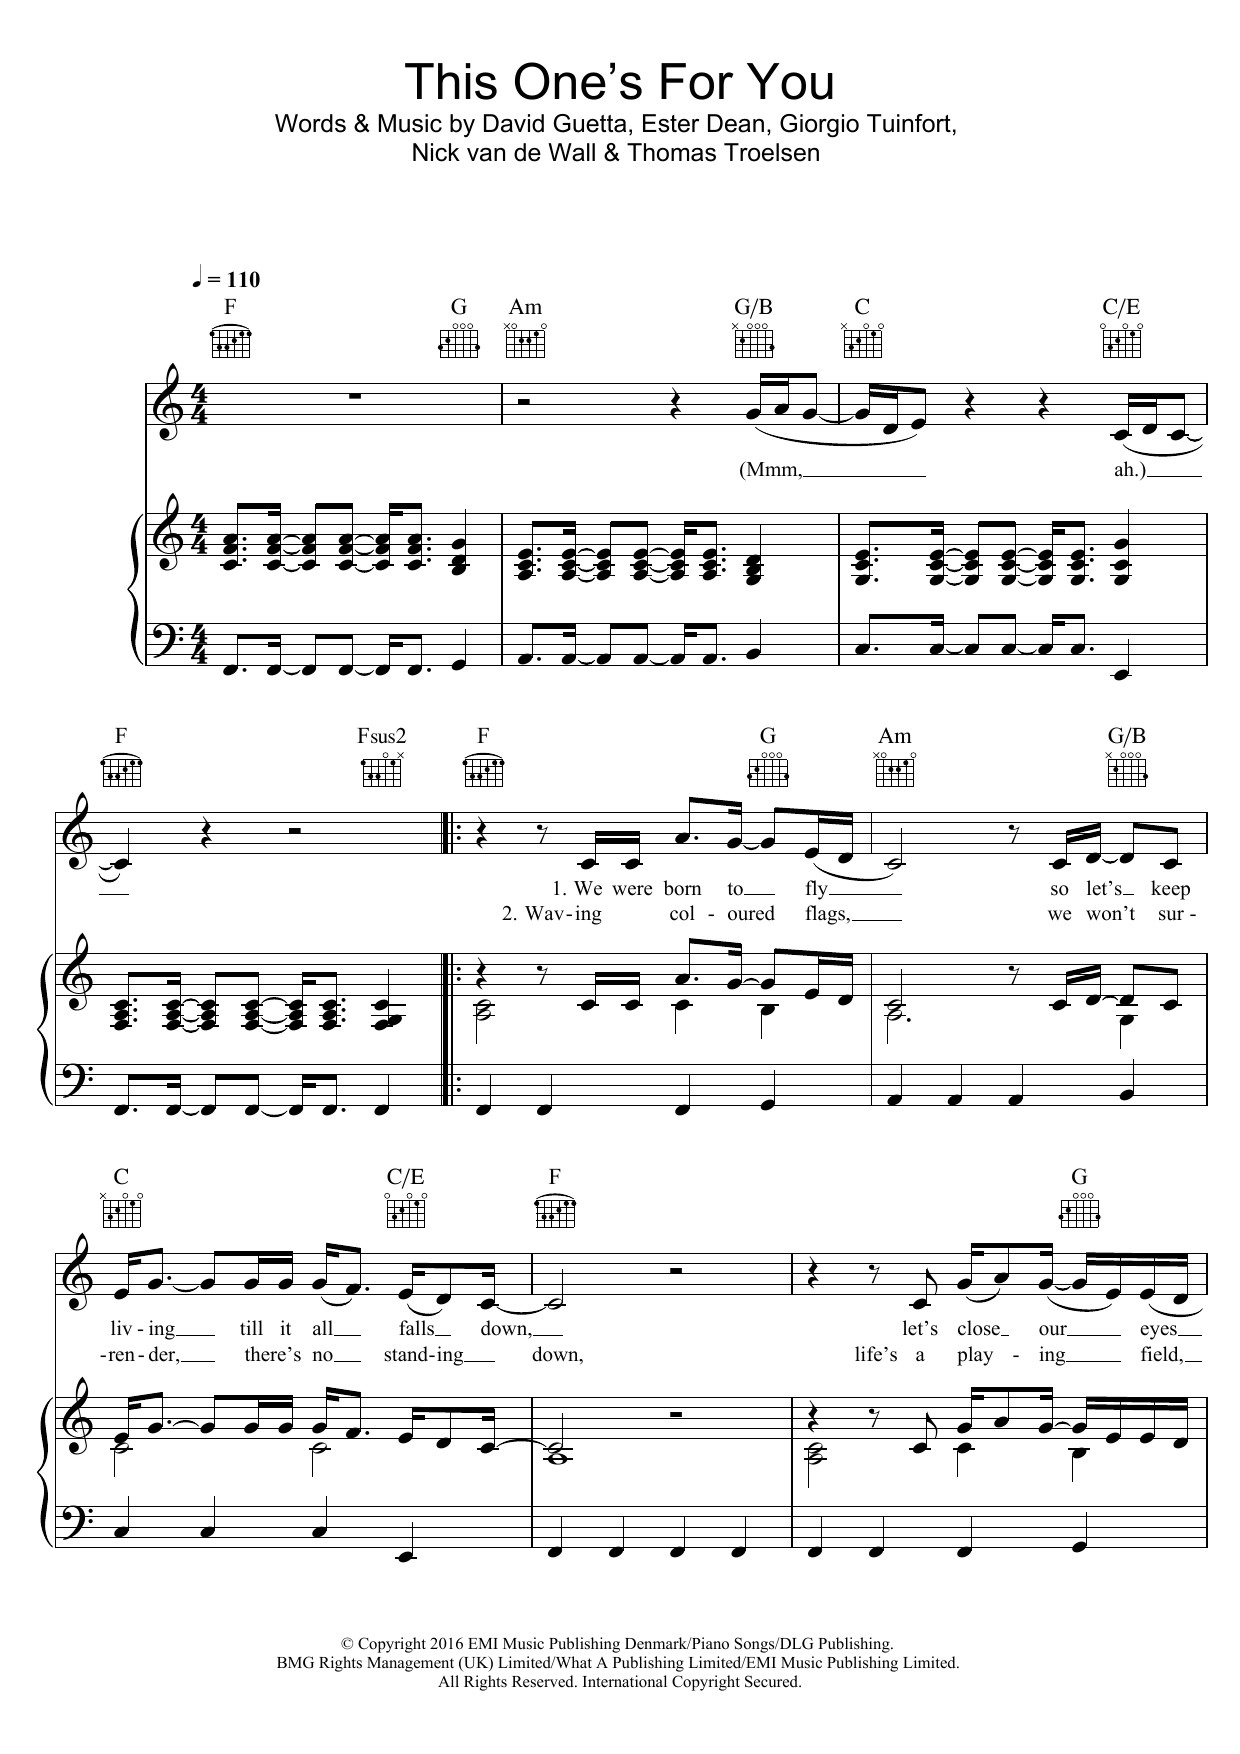 Download David Guetta This One's For You Sheet Music